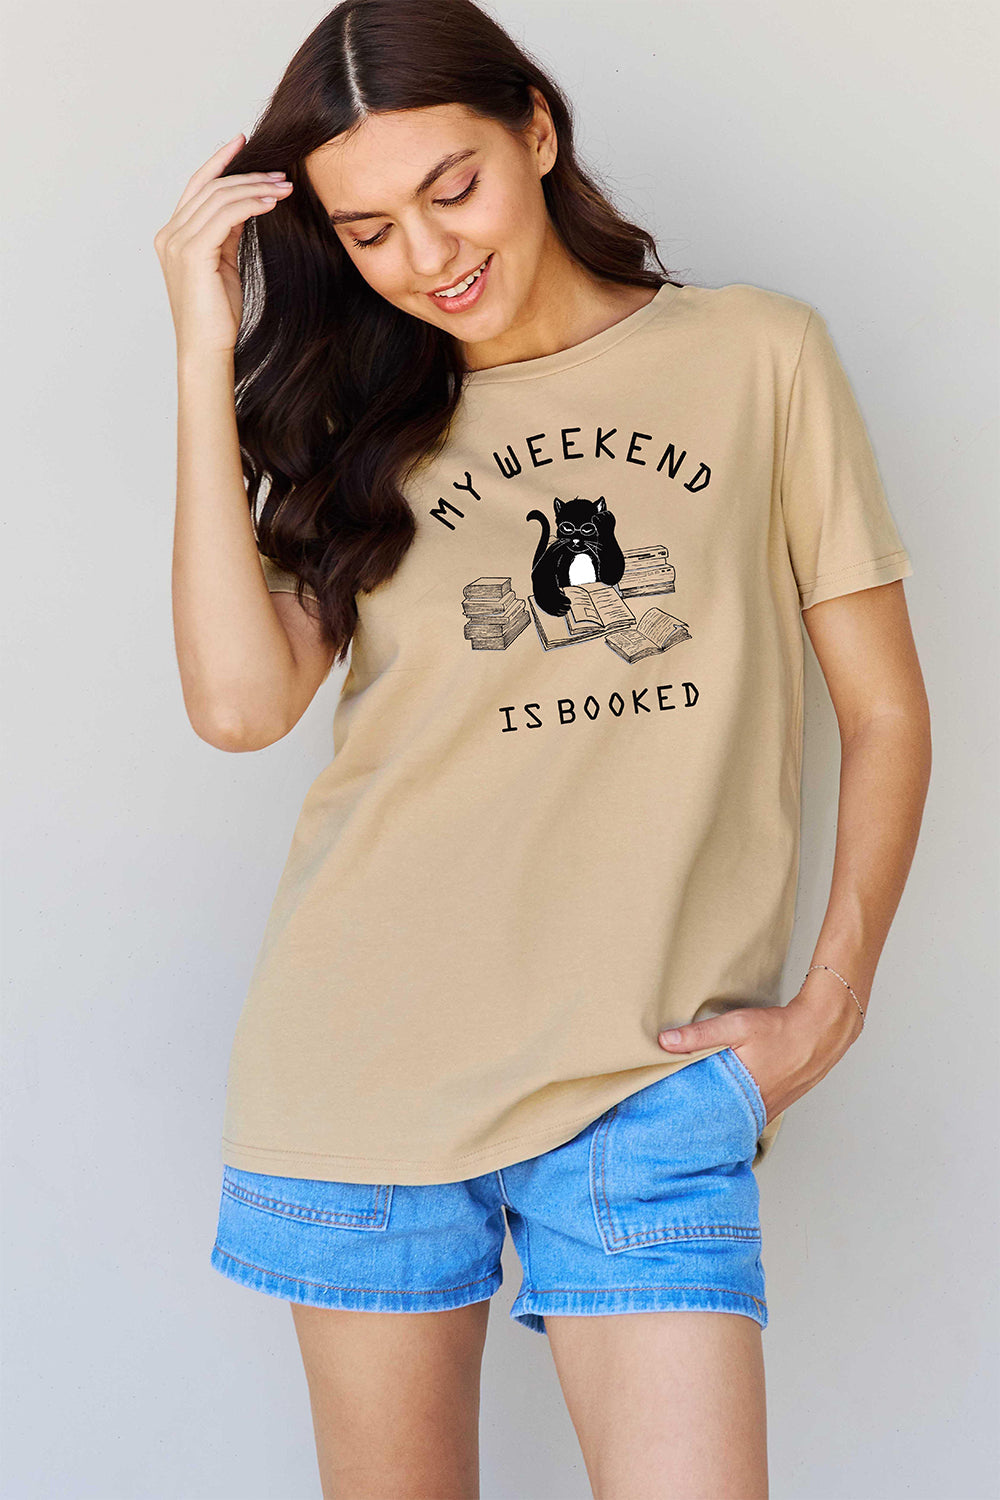 Full Size MY WEEKEND IS BOOKED Graphic T-Shirt - T-Shirts - Shirts & Tops - 7 - 2024